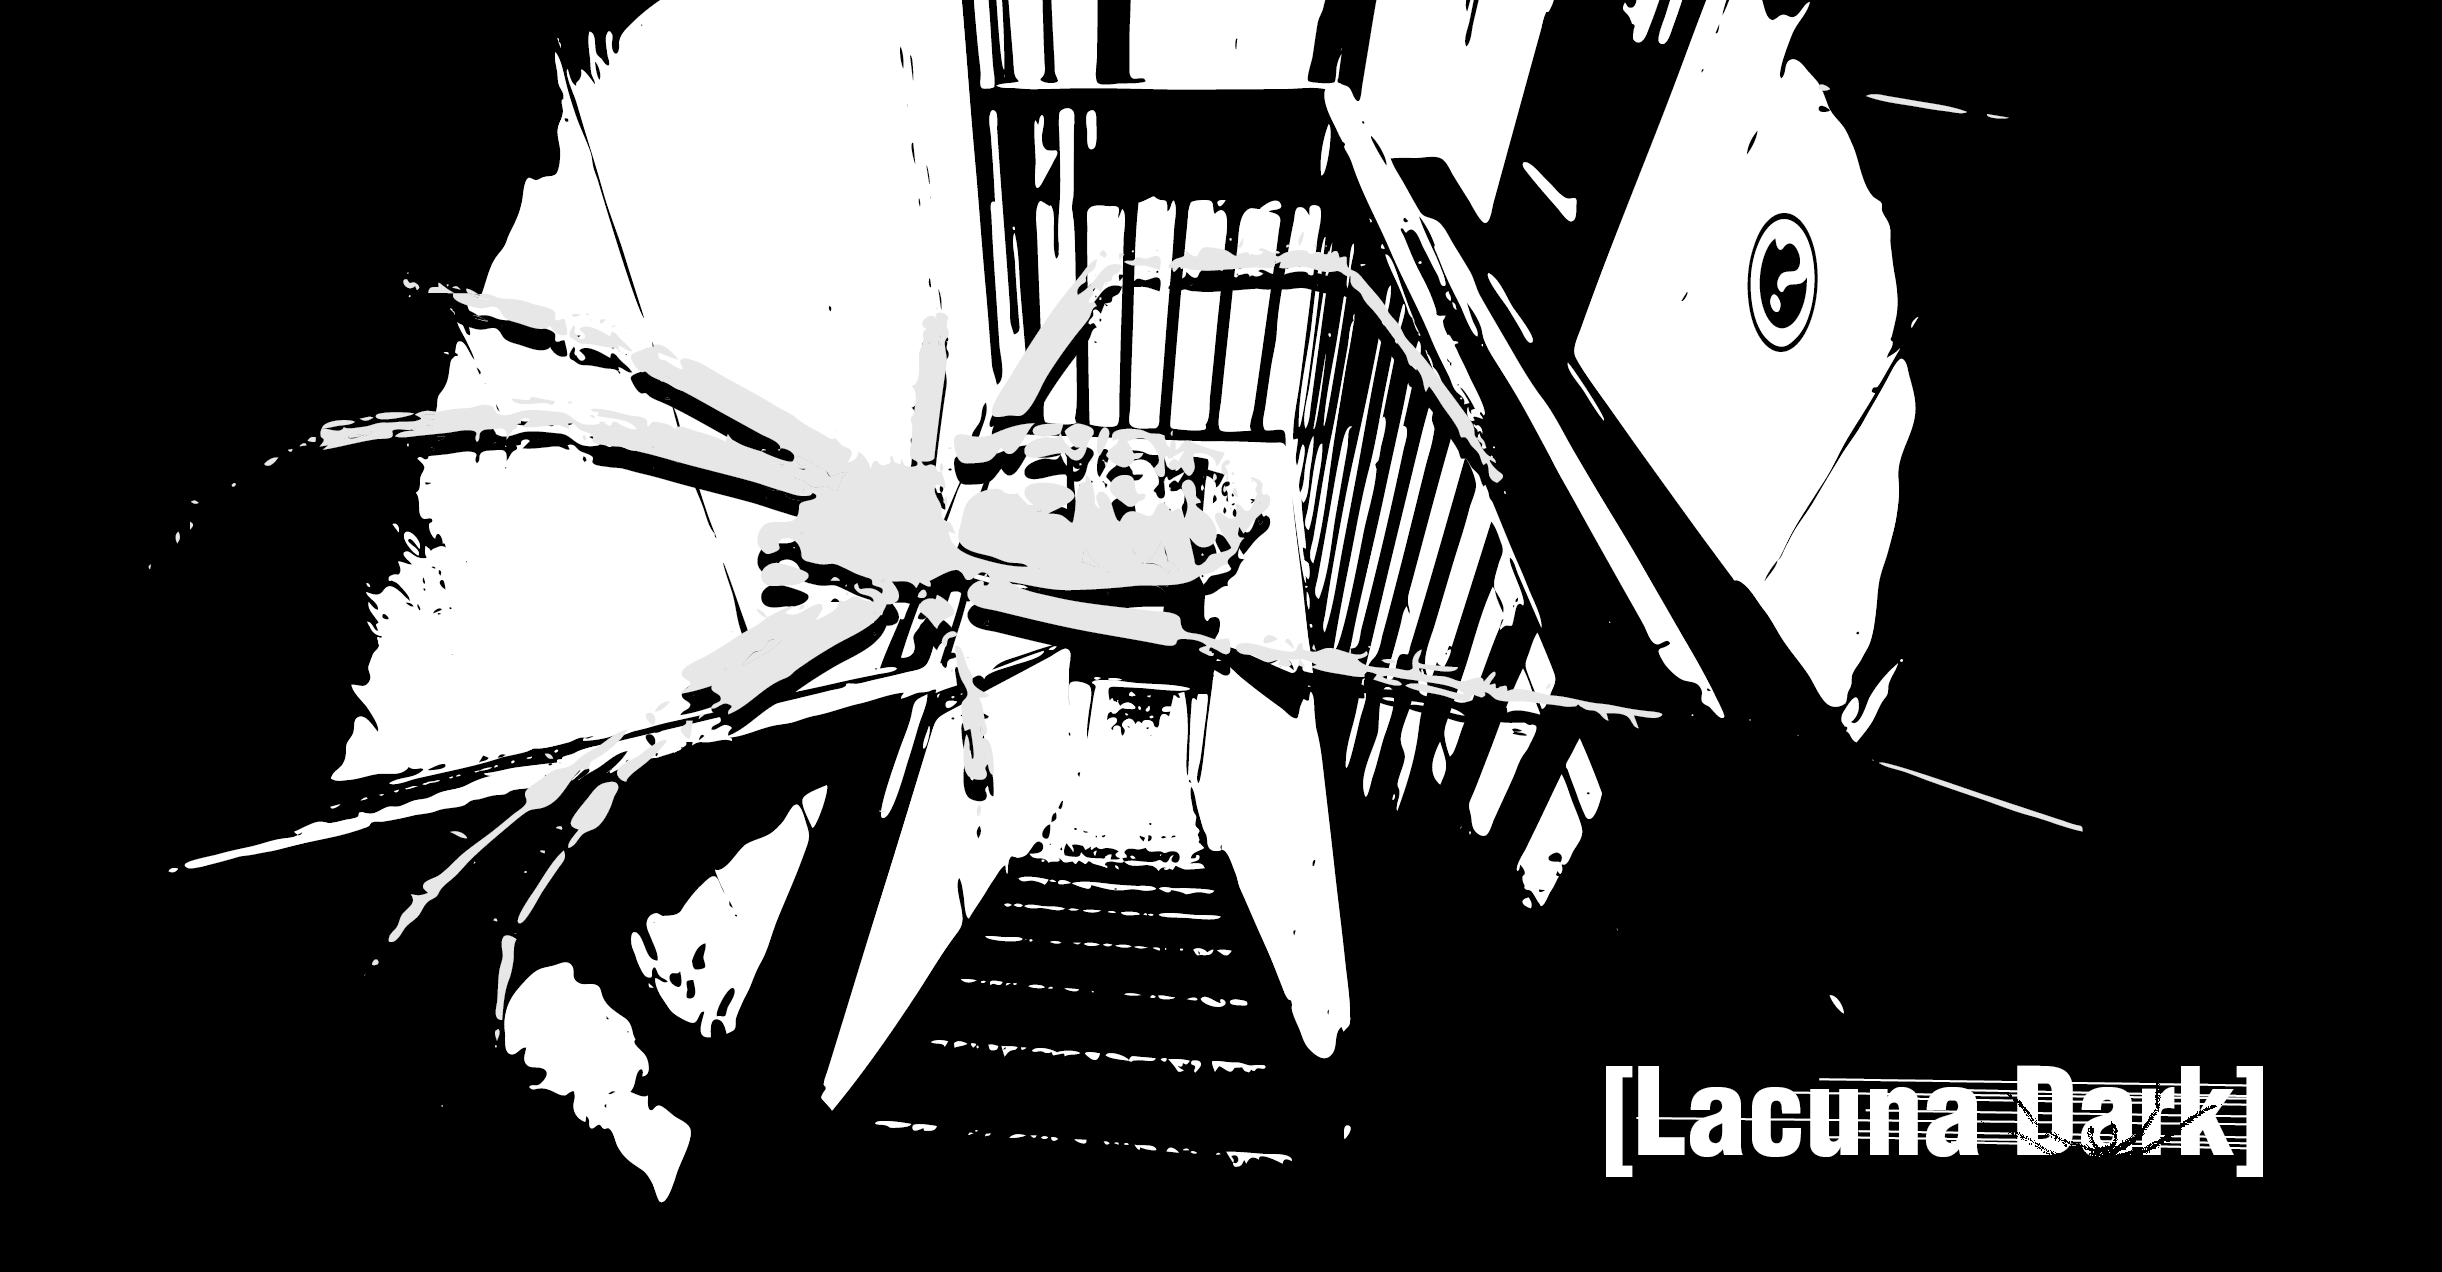 Stark black and white image of a stairwell with a giant spider crawling across